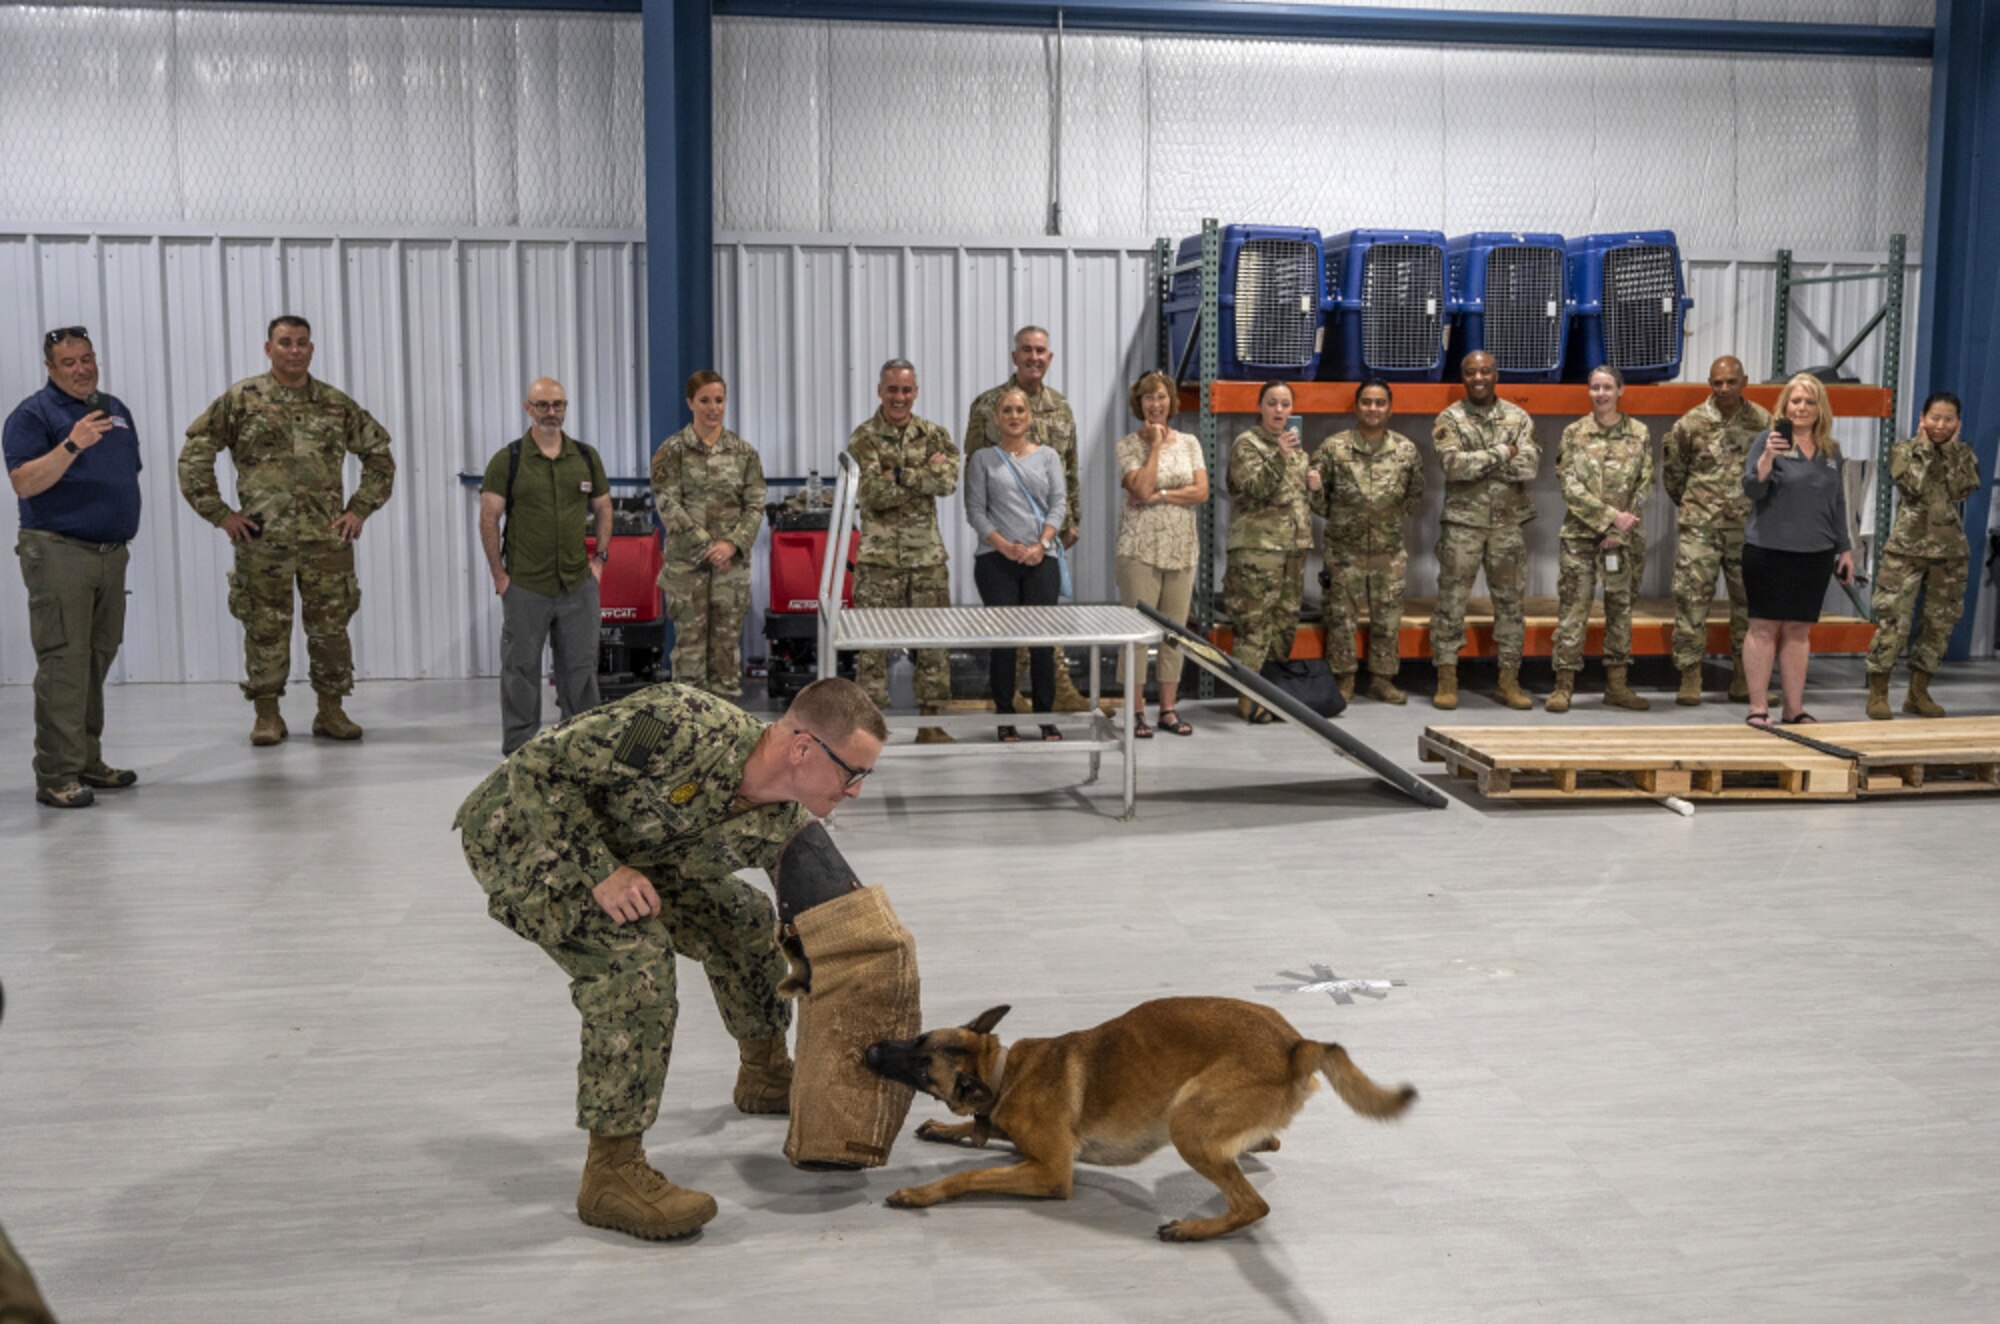 U.S. Air Force Gen. John E. Hyten and SEAC Ramón "CZ" Colón-López, along with members and entertainers, watch a military working dog demonstration at JBSA-Lackland.